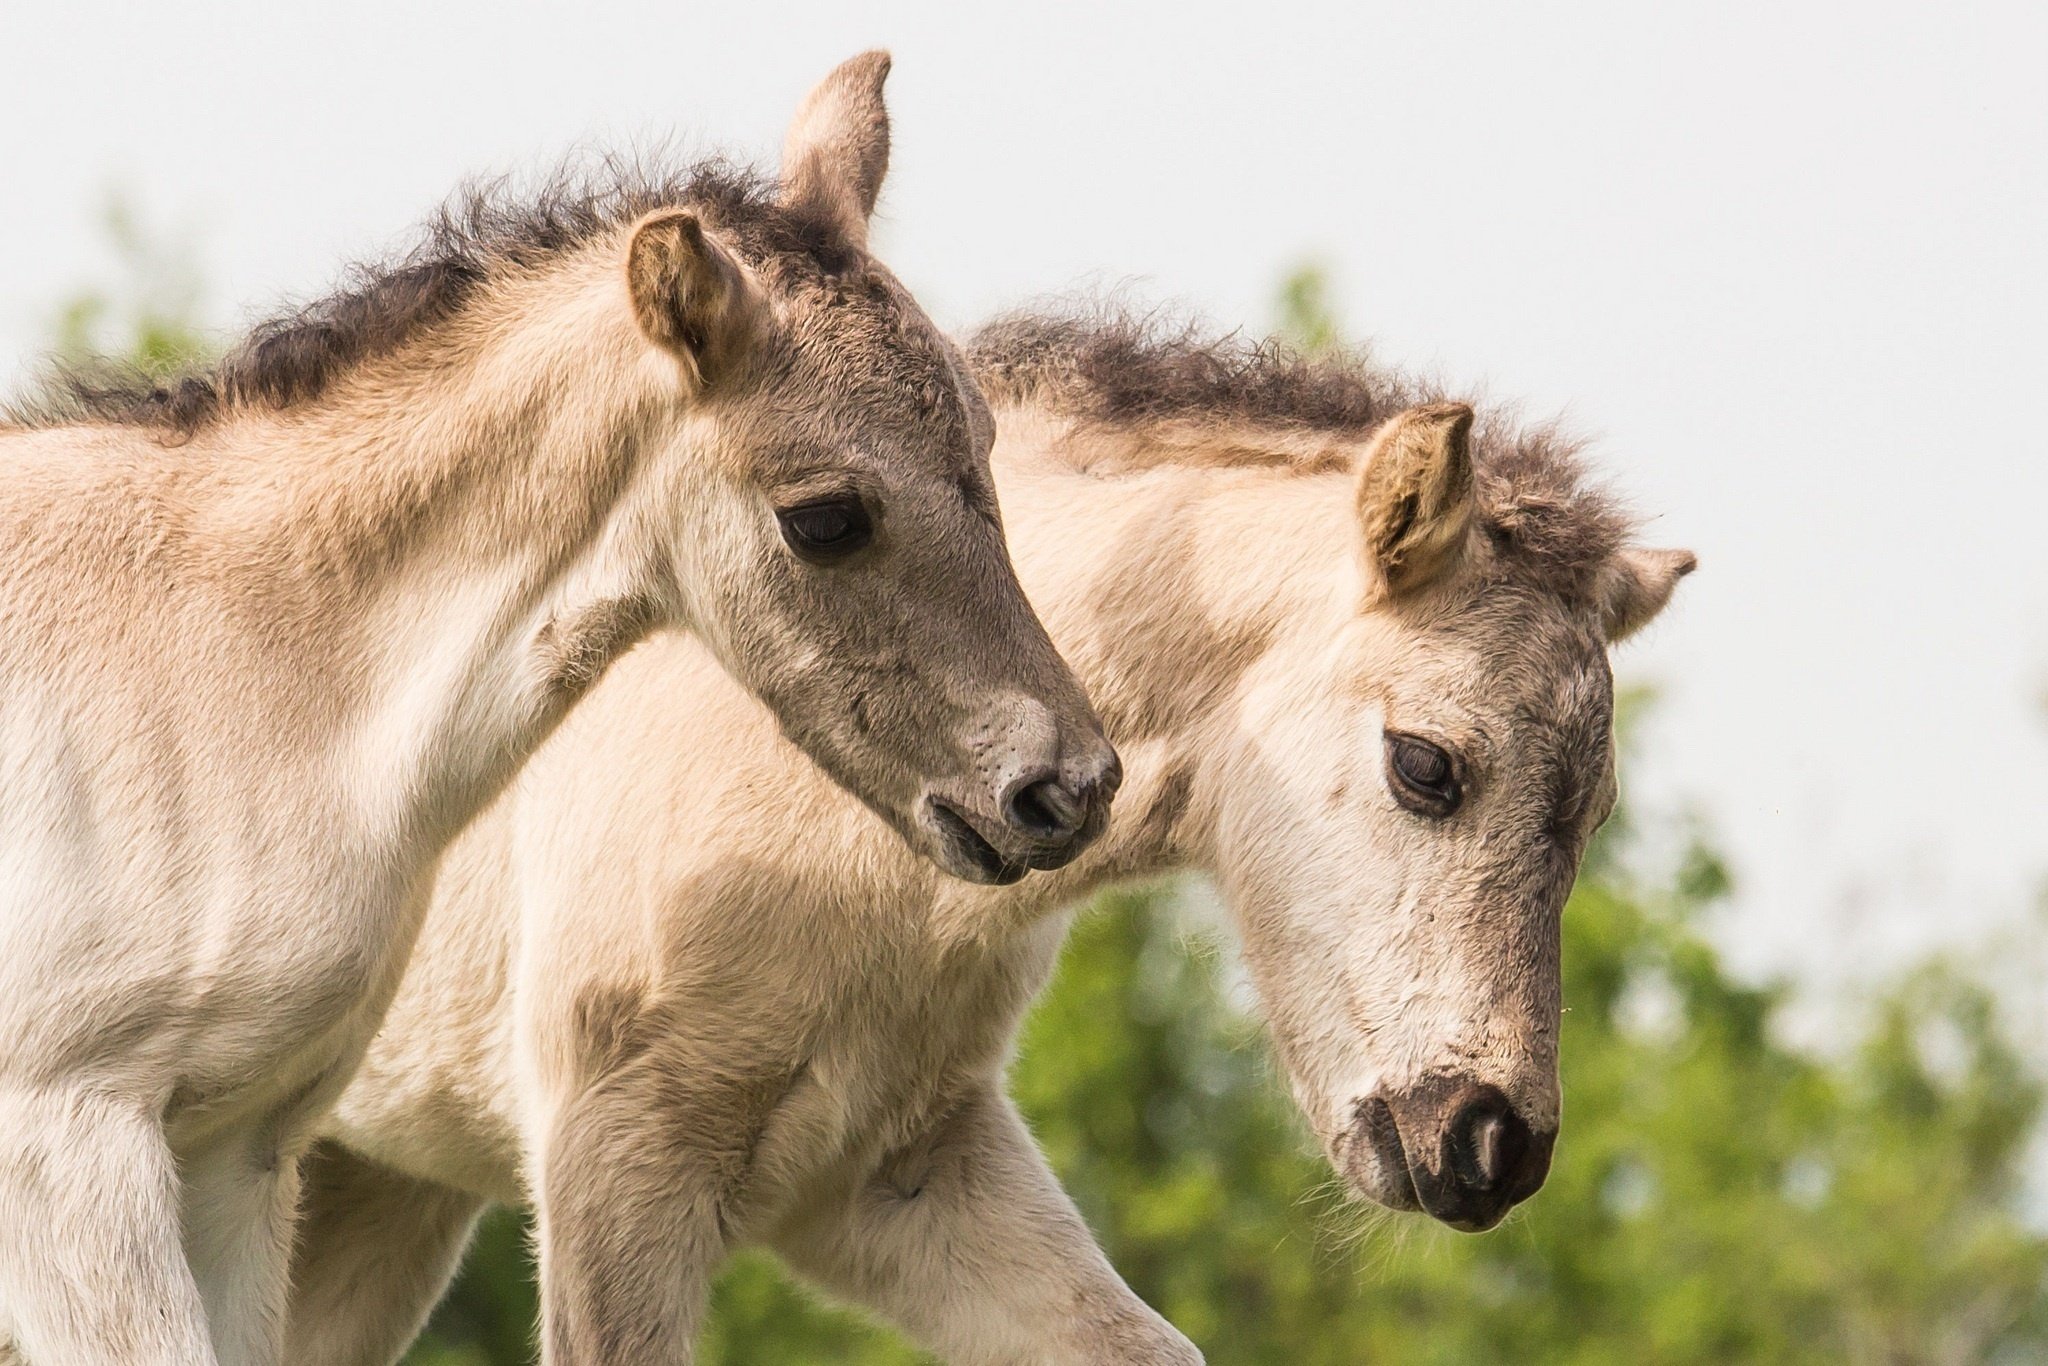 Baby Horse Wallpapers